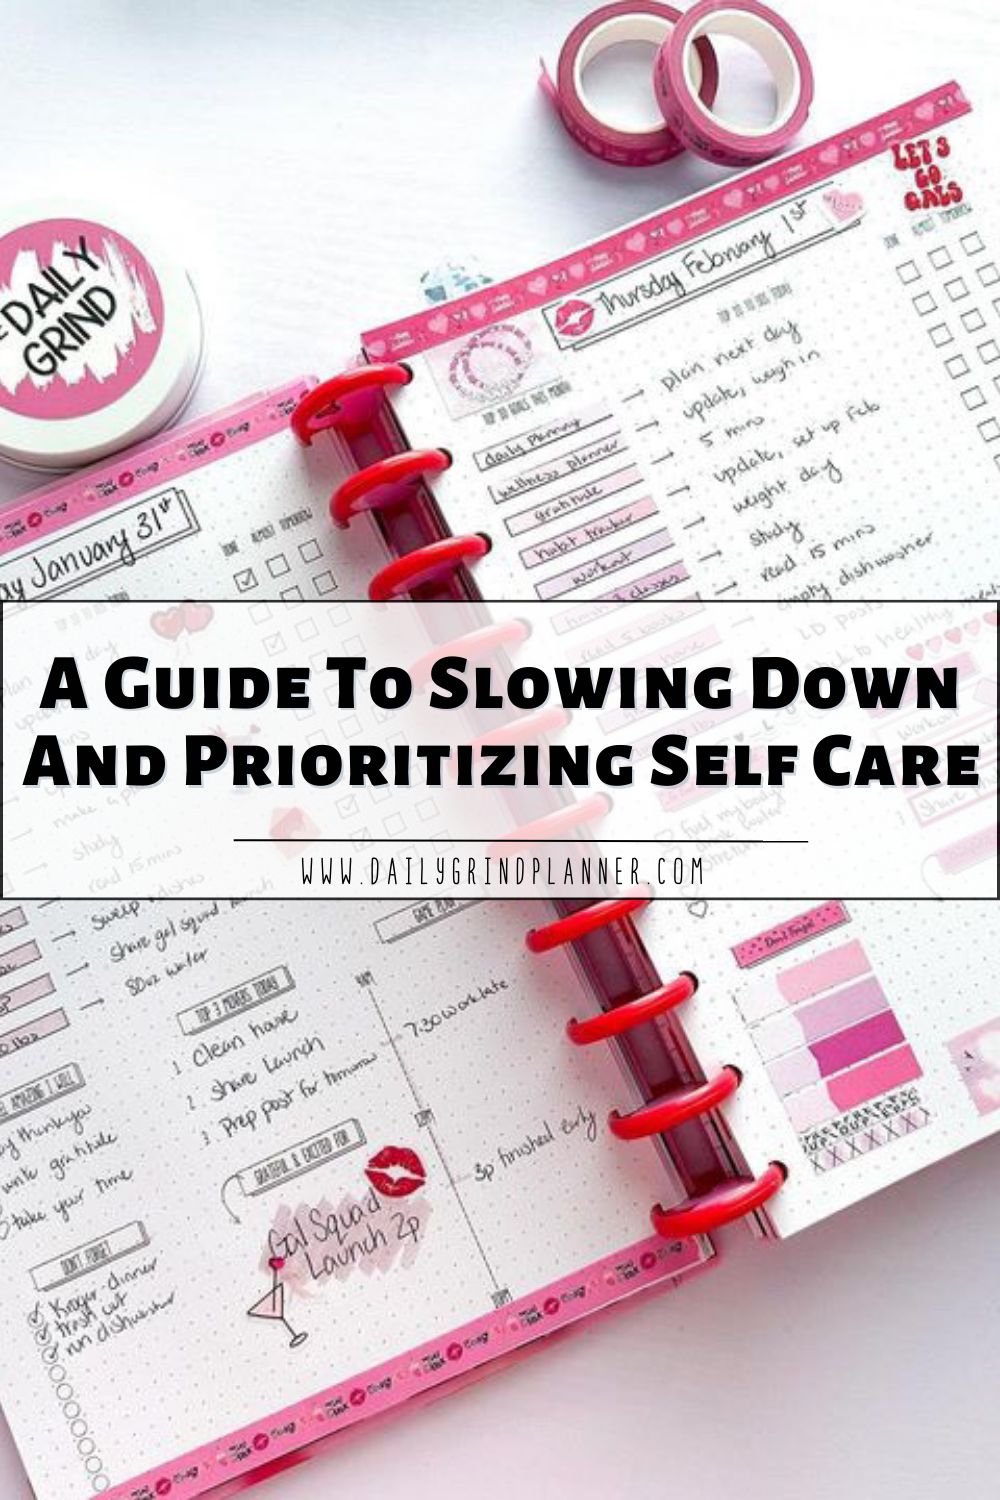 A Guide To Slowing Down And Prioritizing Self Care